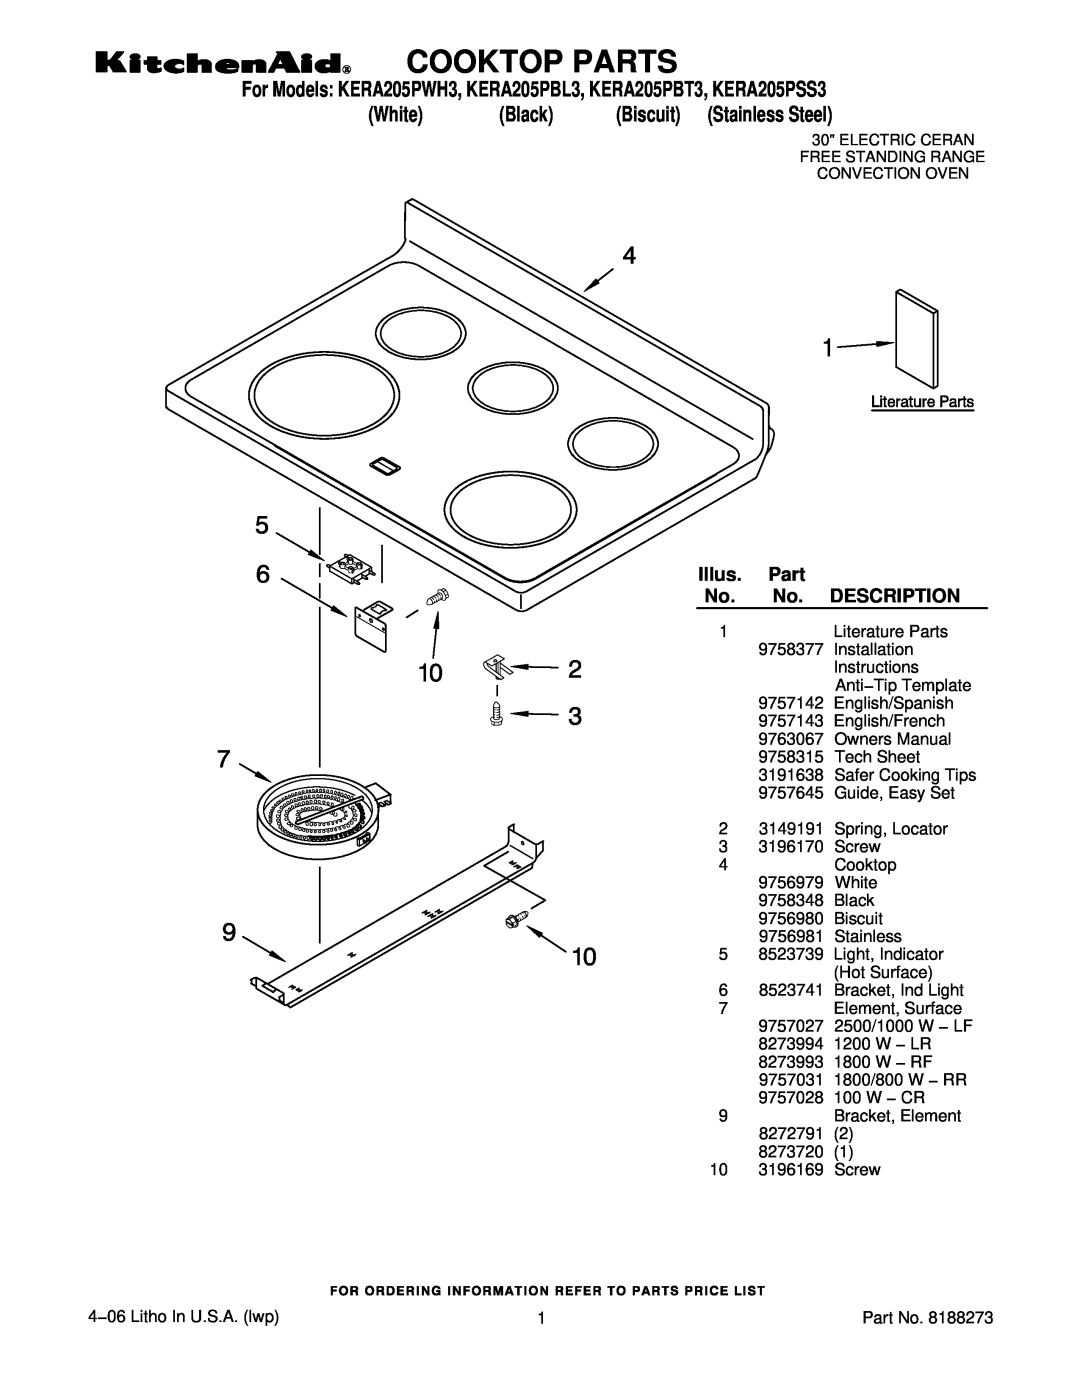 KitchenAid KERA205PSS3, KERA205PWH3 installation instructions Cooktop Parts, White, Black, Biscuit Stainless Steel 